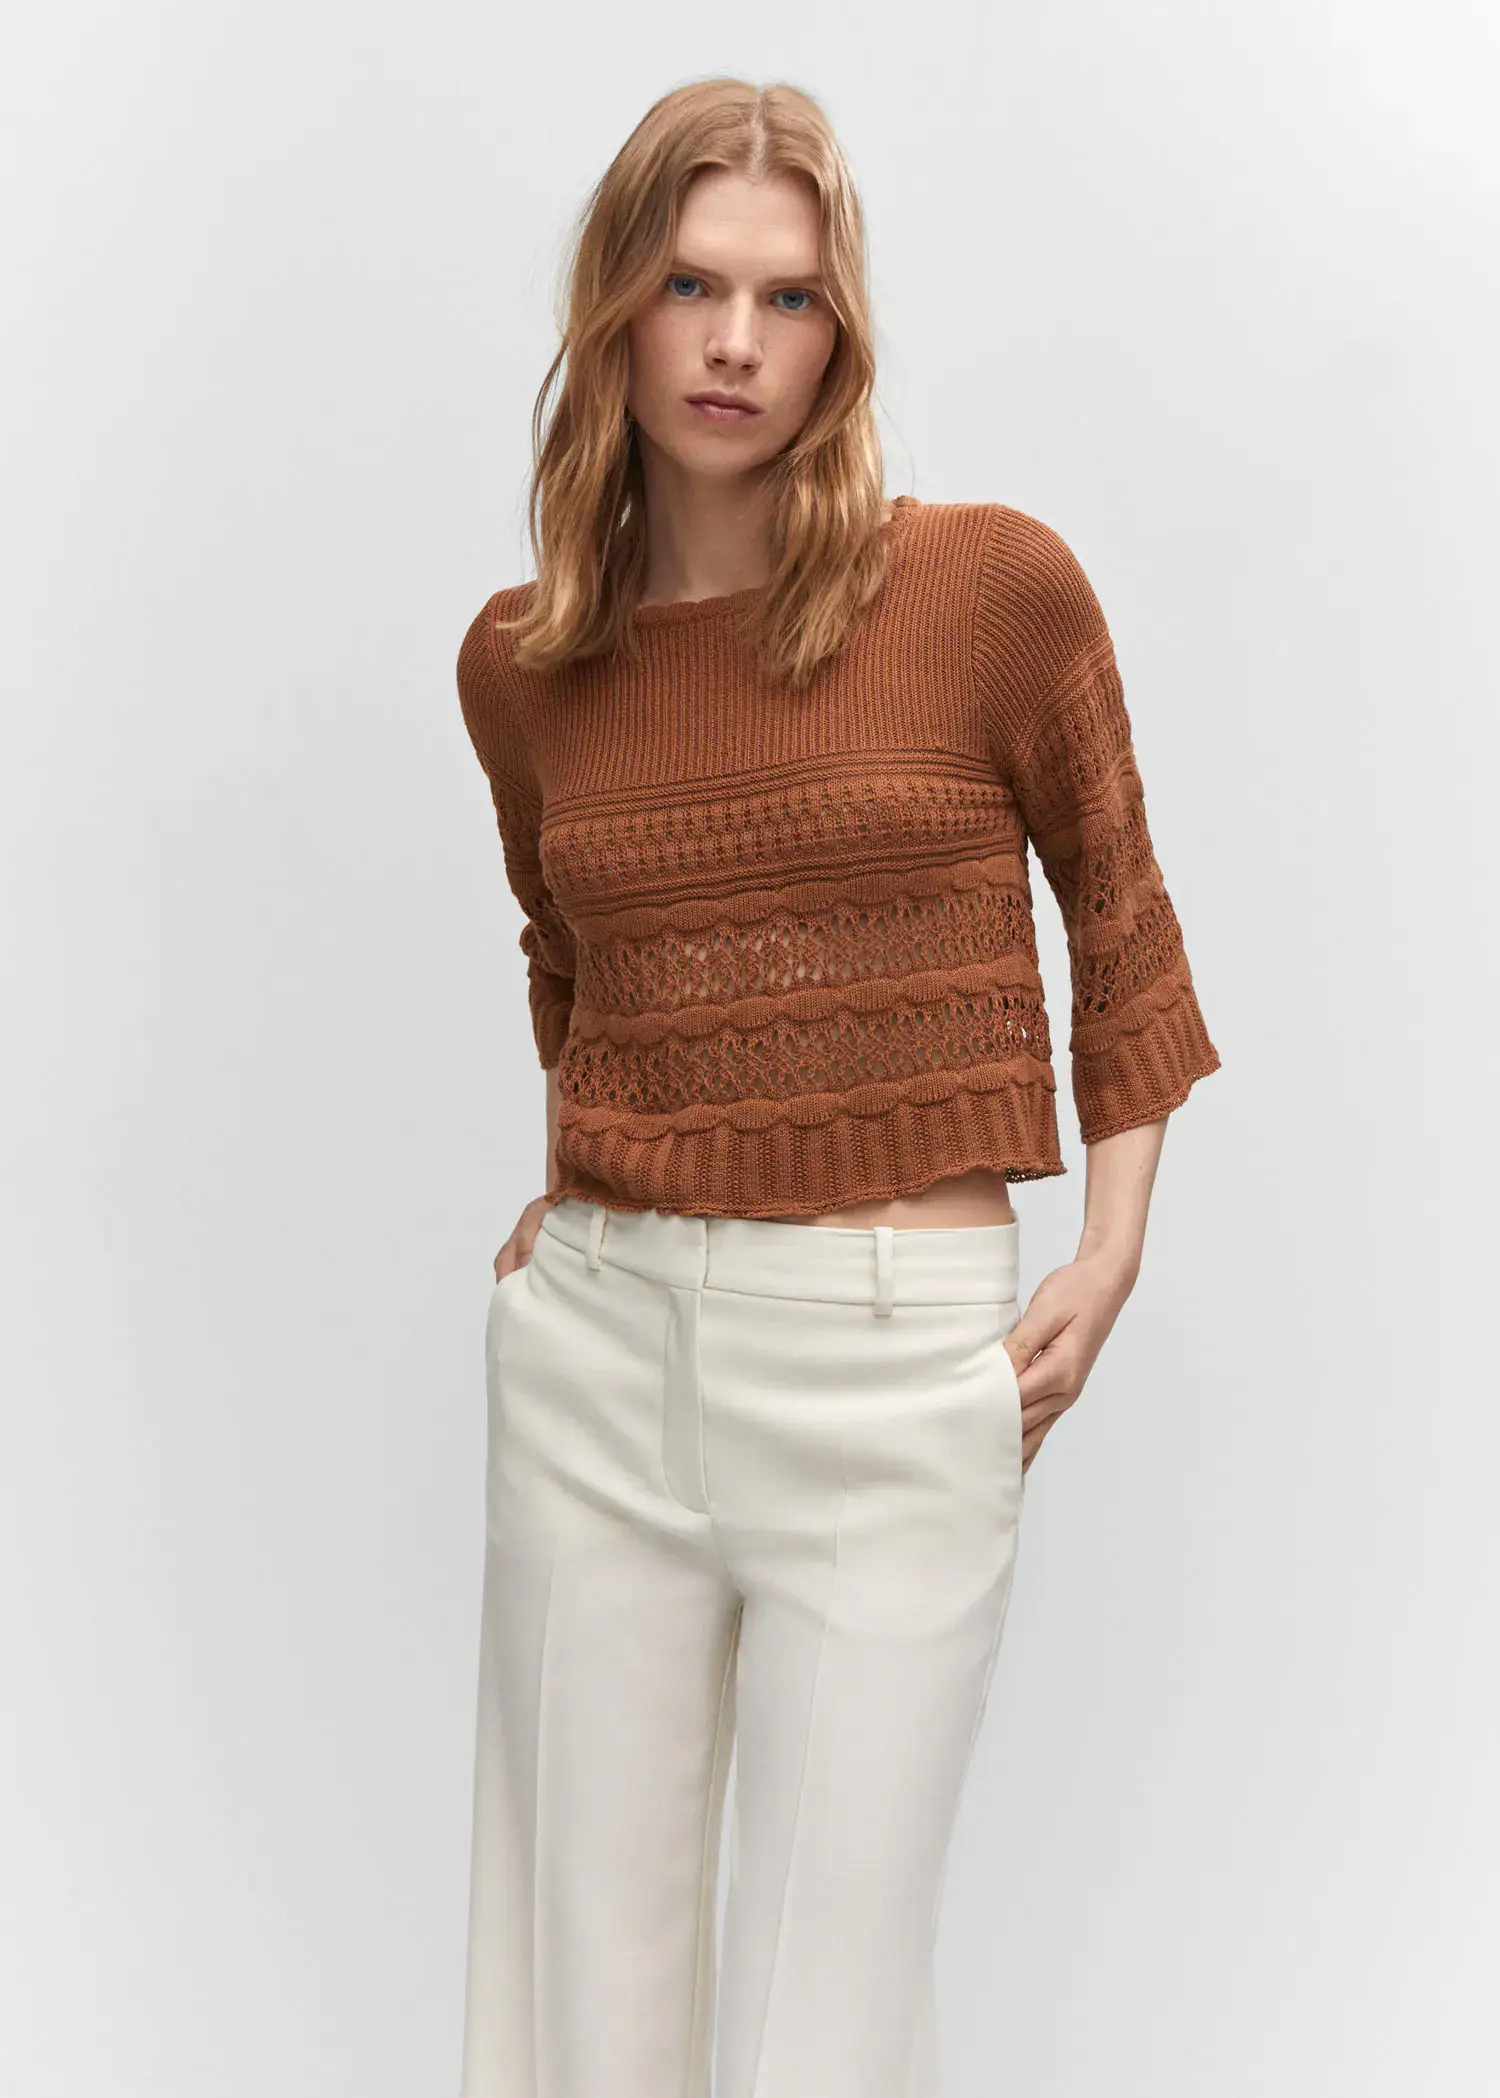 Mango Openwork sweater with flared sleeves. a woman wearing white pants and a brown sweater. 